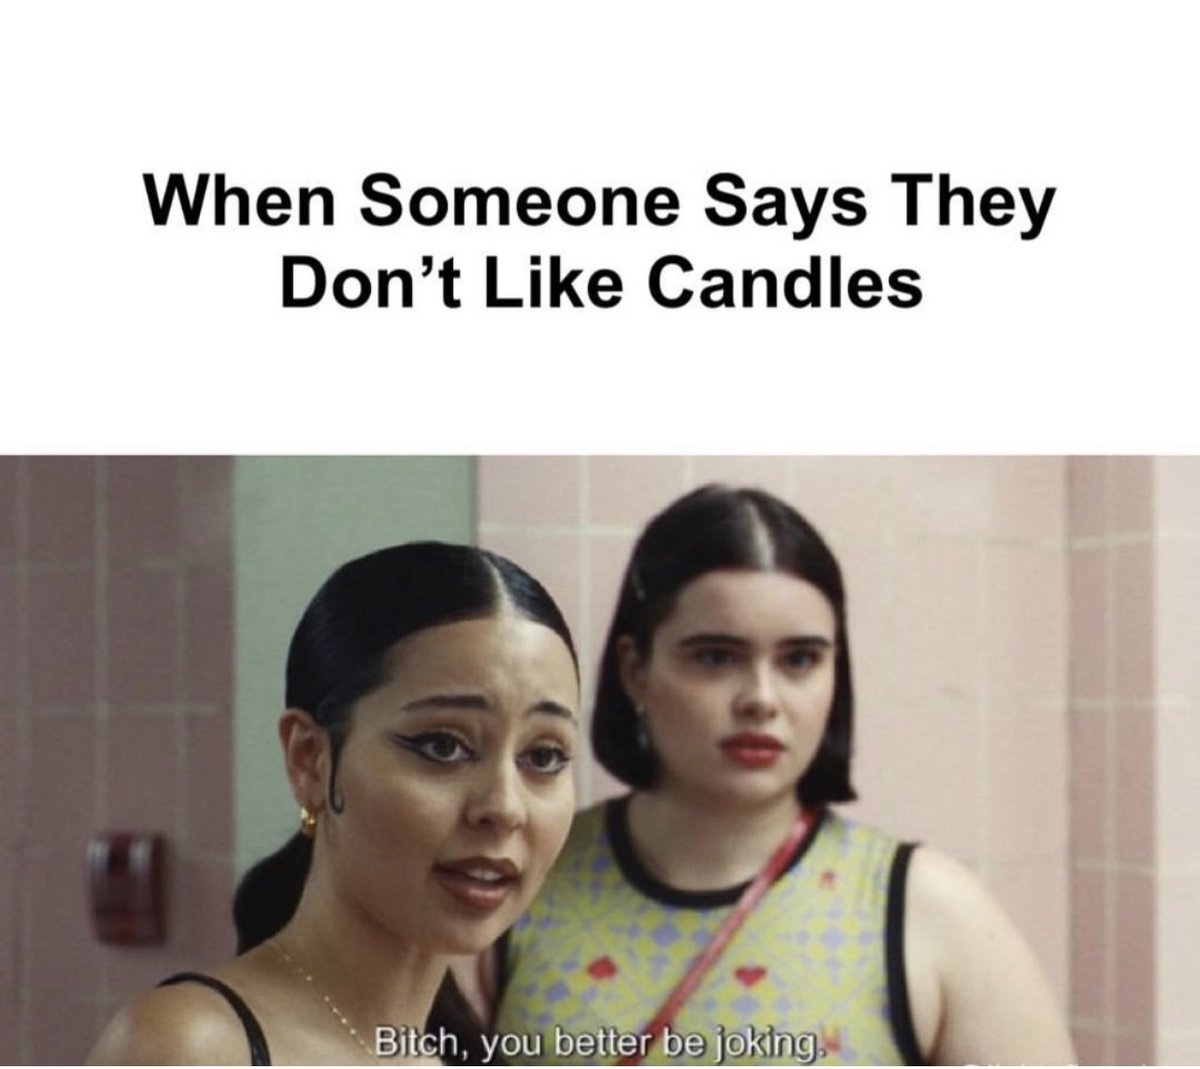 You better be 🤷🏾‍♀️😩
.
.

 #smellslikeblkluxury #luxurycandles #candlelovers #womaninbusiness#candlereview #smallbusinesssaturday#homemadecandles #smallbusiness #coconutsoycandles #supportsmallbusiness #recycle #natural#blackowned #waxedandwicked #candleaddict #candlesofinstag